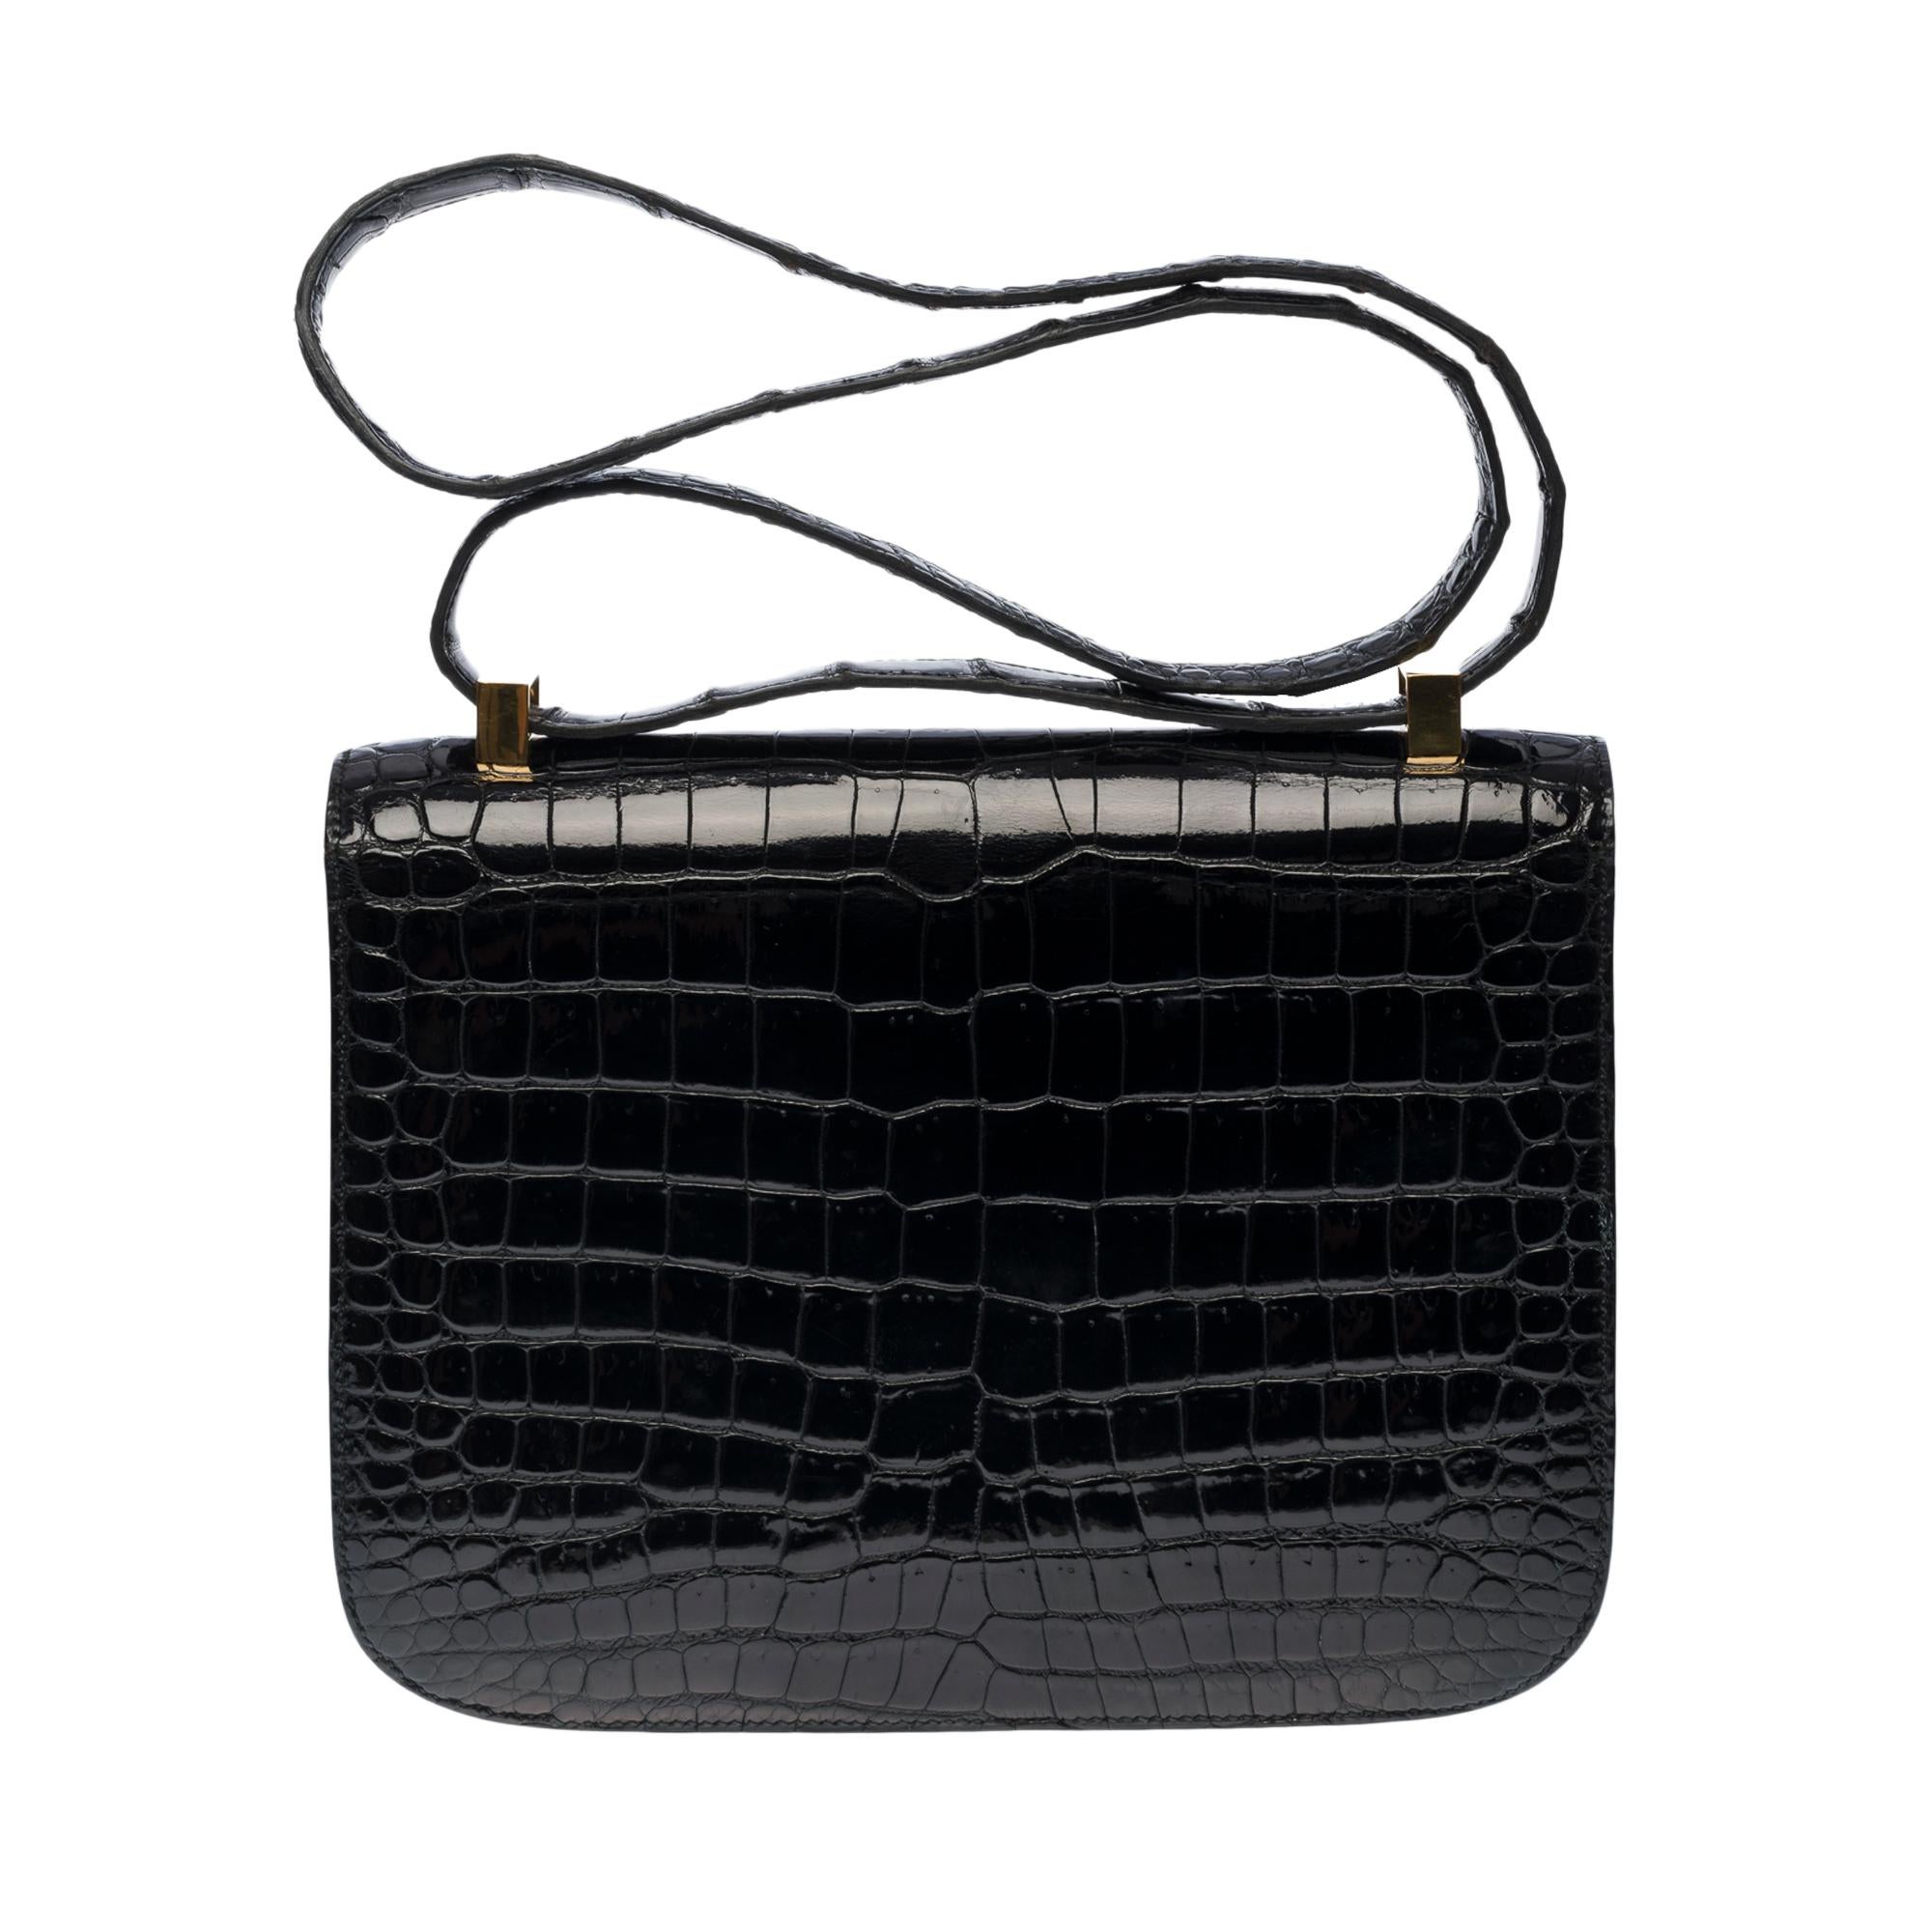 Amazing Hermes Constance 23 shoulder bag in black porosus crocodile leather , gold-plated metal hardware, black crocodile handle for hand or shoulder support

Fastener with logo on flap
Black leather lining, one zippered pocket, one patch